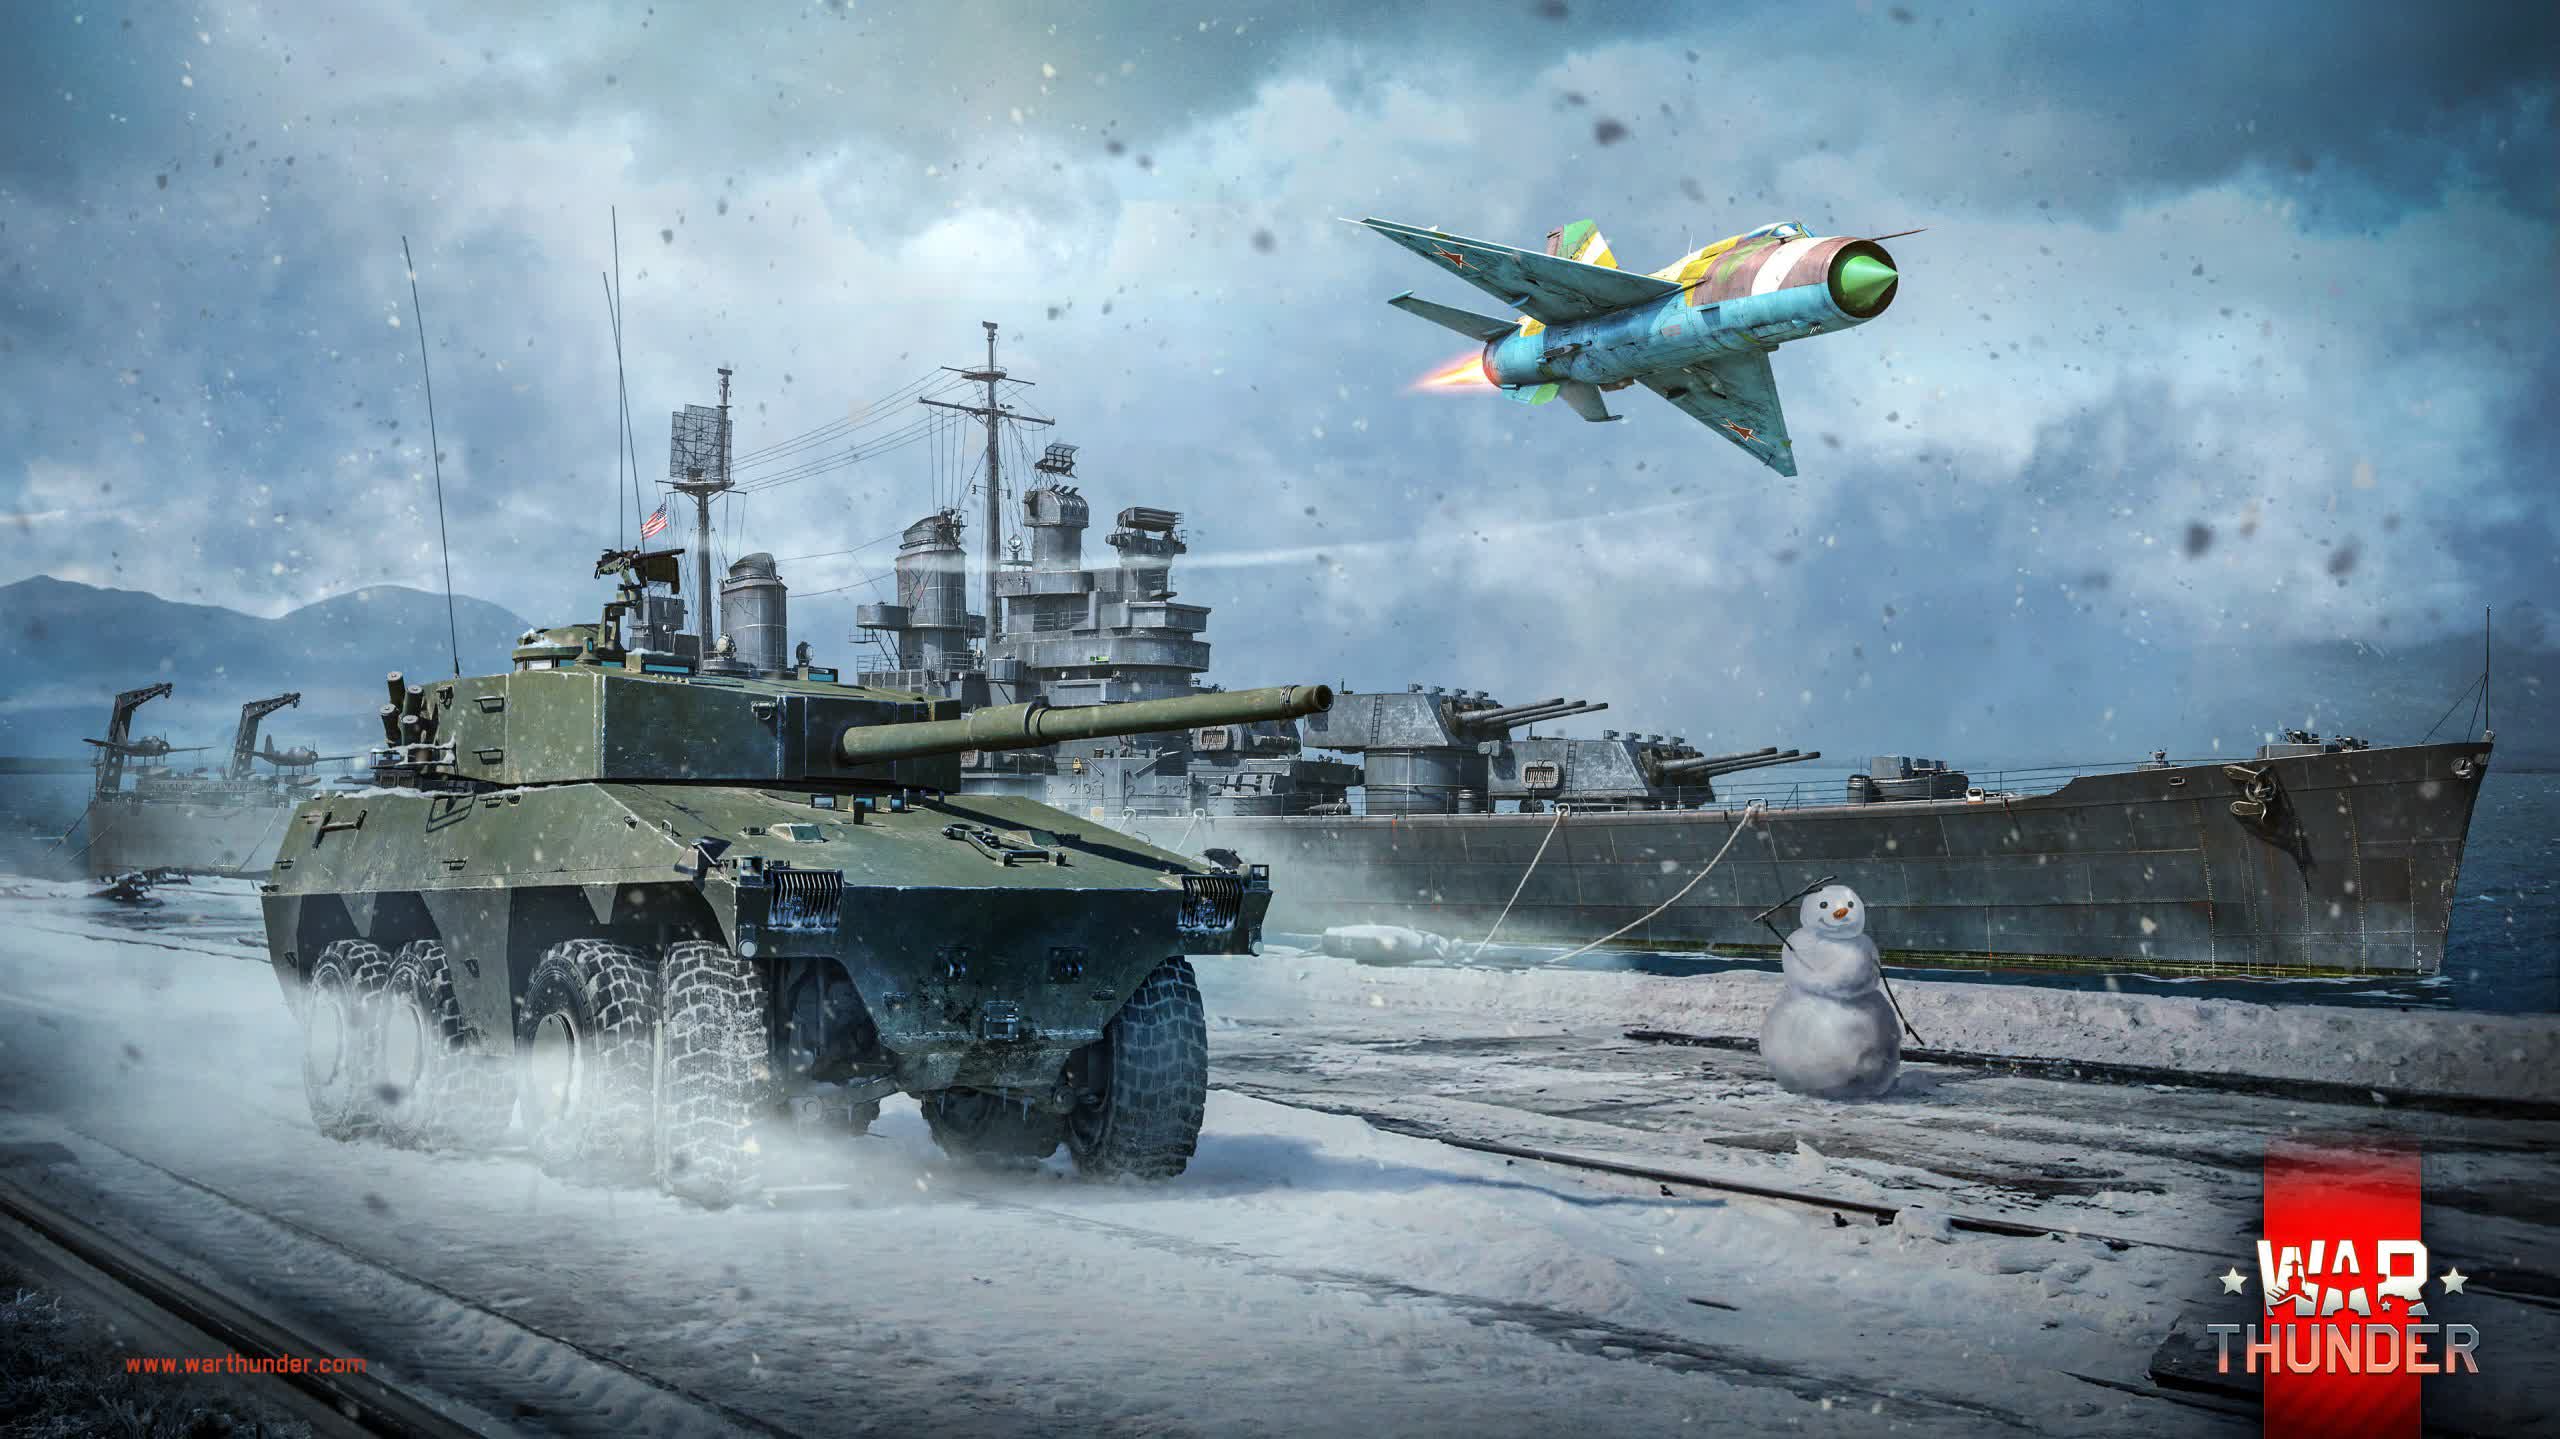 Defense contractor confirms it doesn't discriminate against War Thunder players